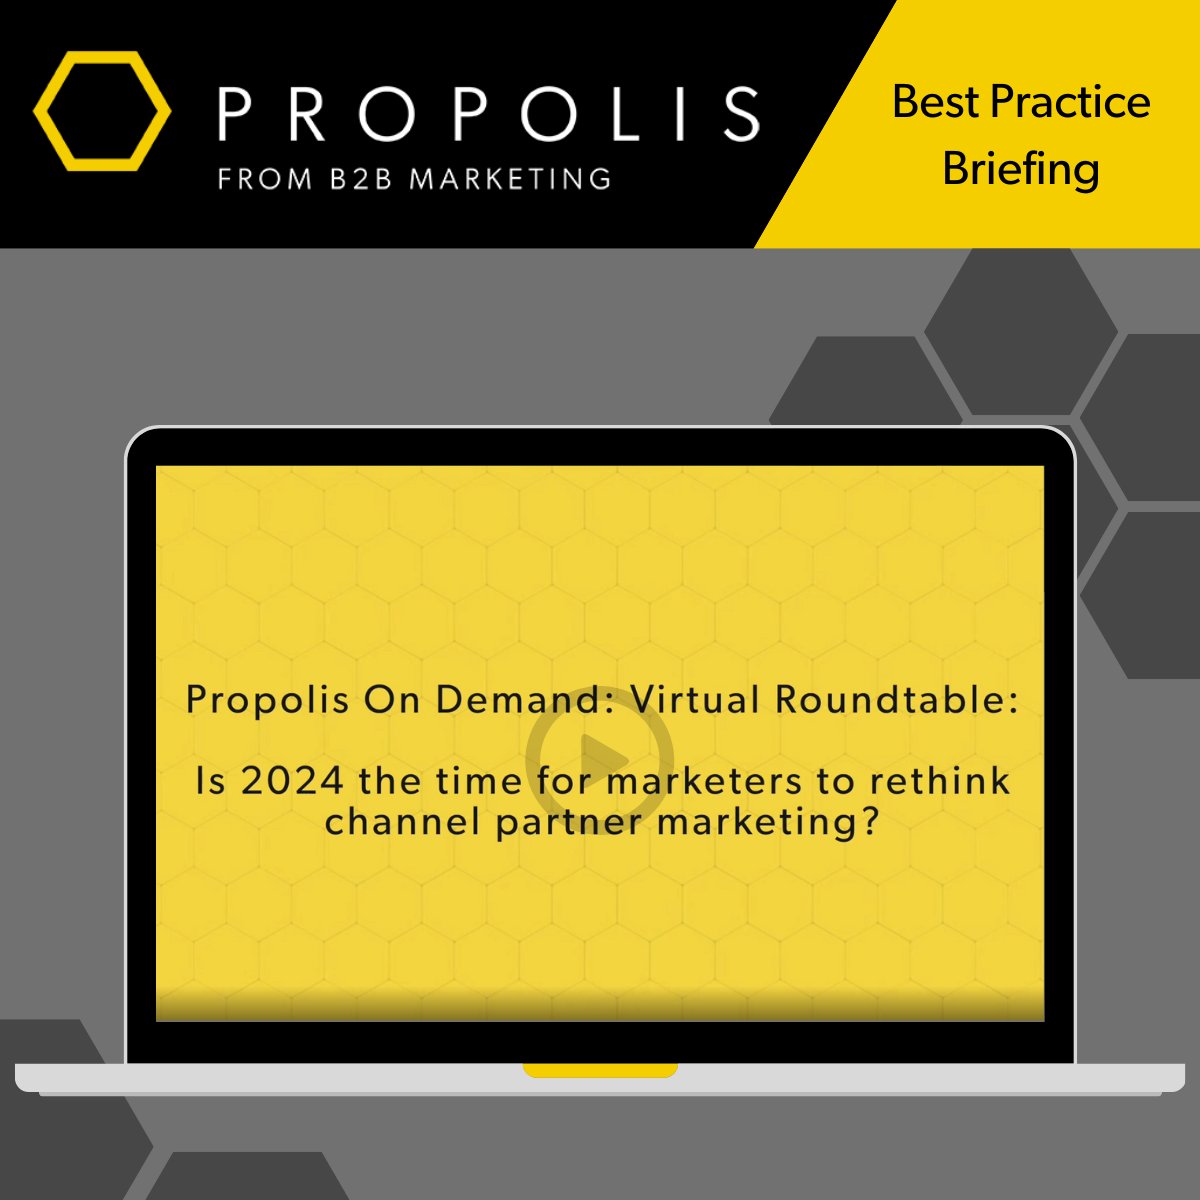 Propolis just wrapped up an enlightening session on optimizing channel partnerships for B2B organizations. We covered: -Strategic Alignment -Silos No More -Power in Partnerships -Collaboration for Success Watch the full session here:okt.to/YMT2k0